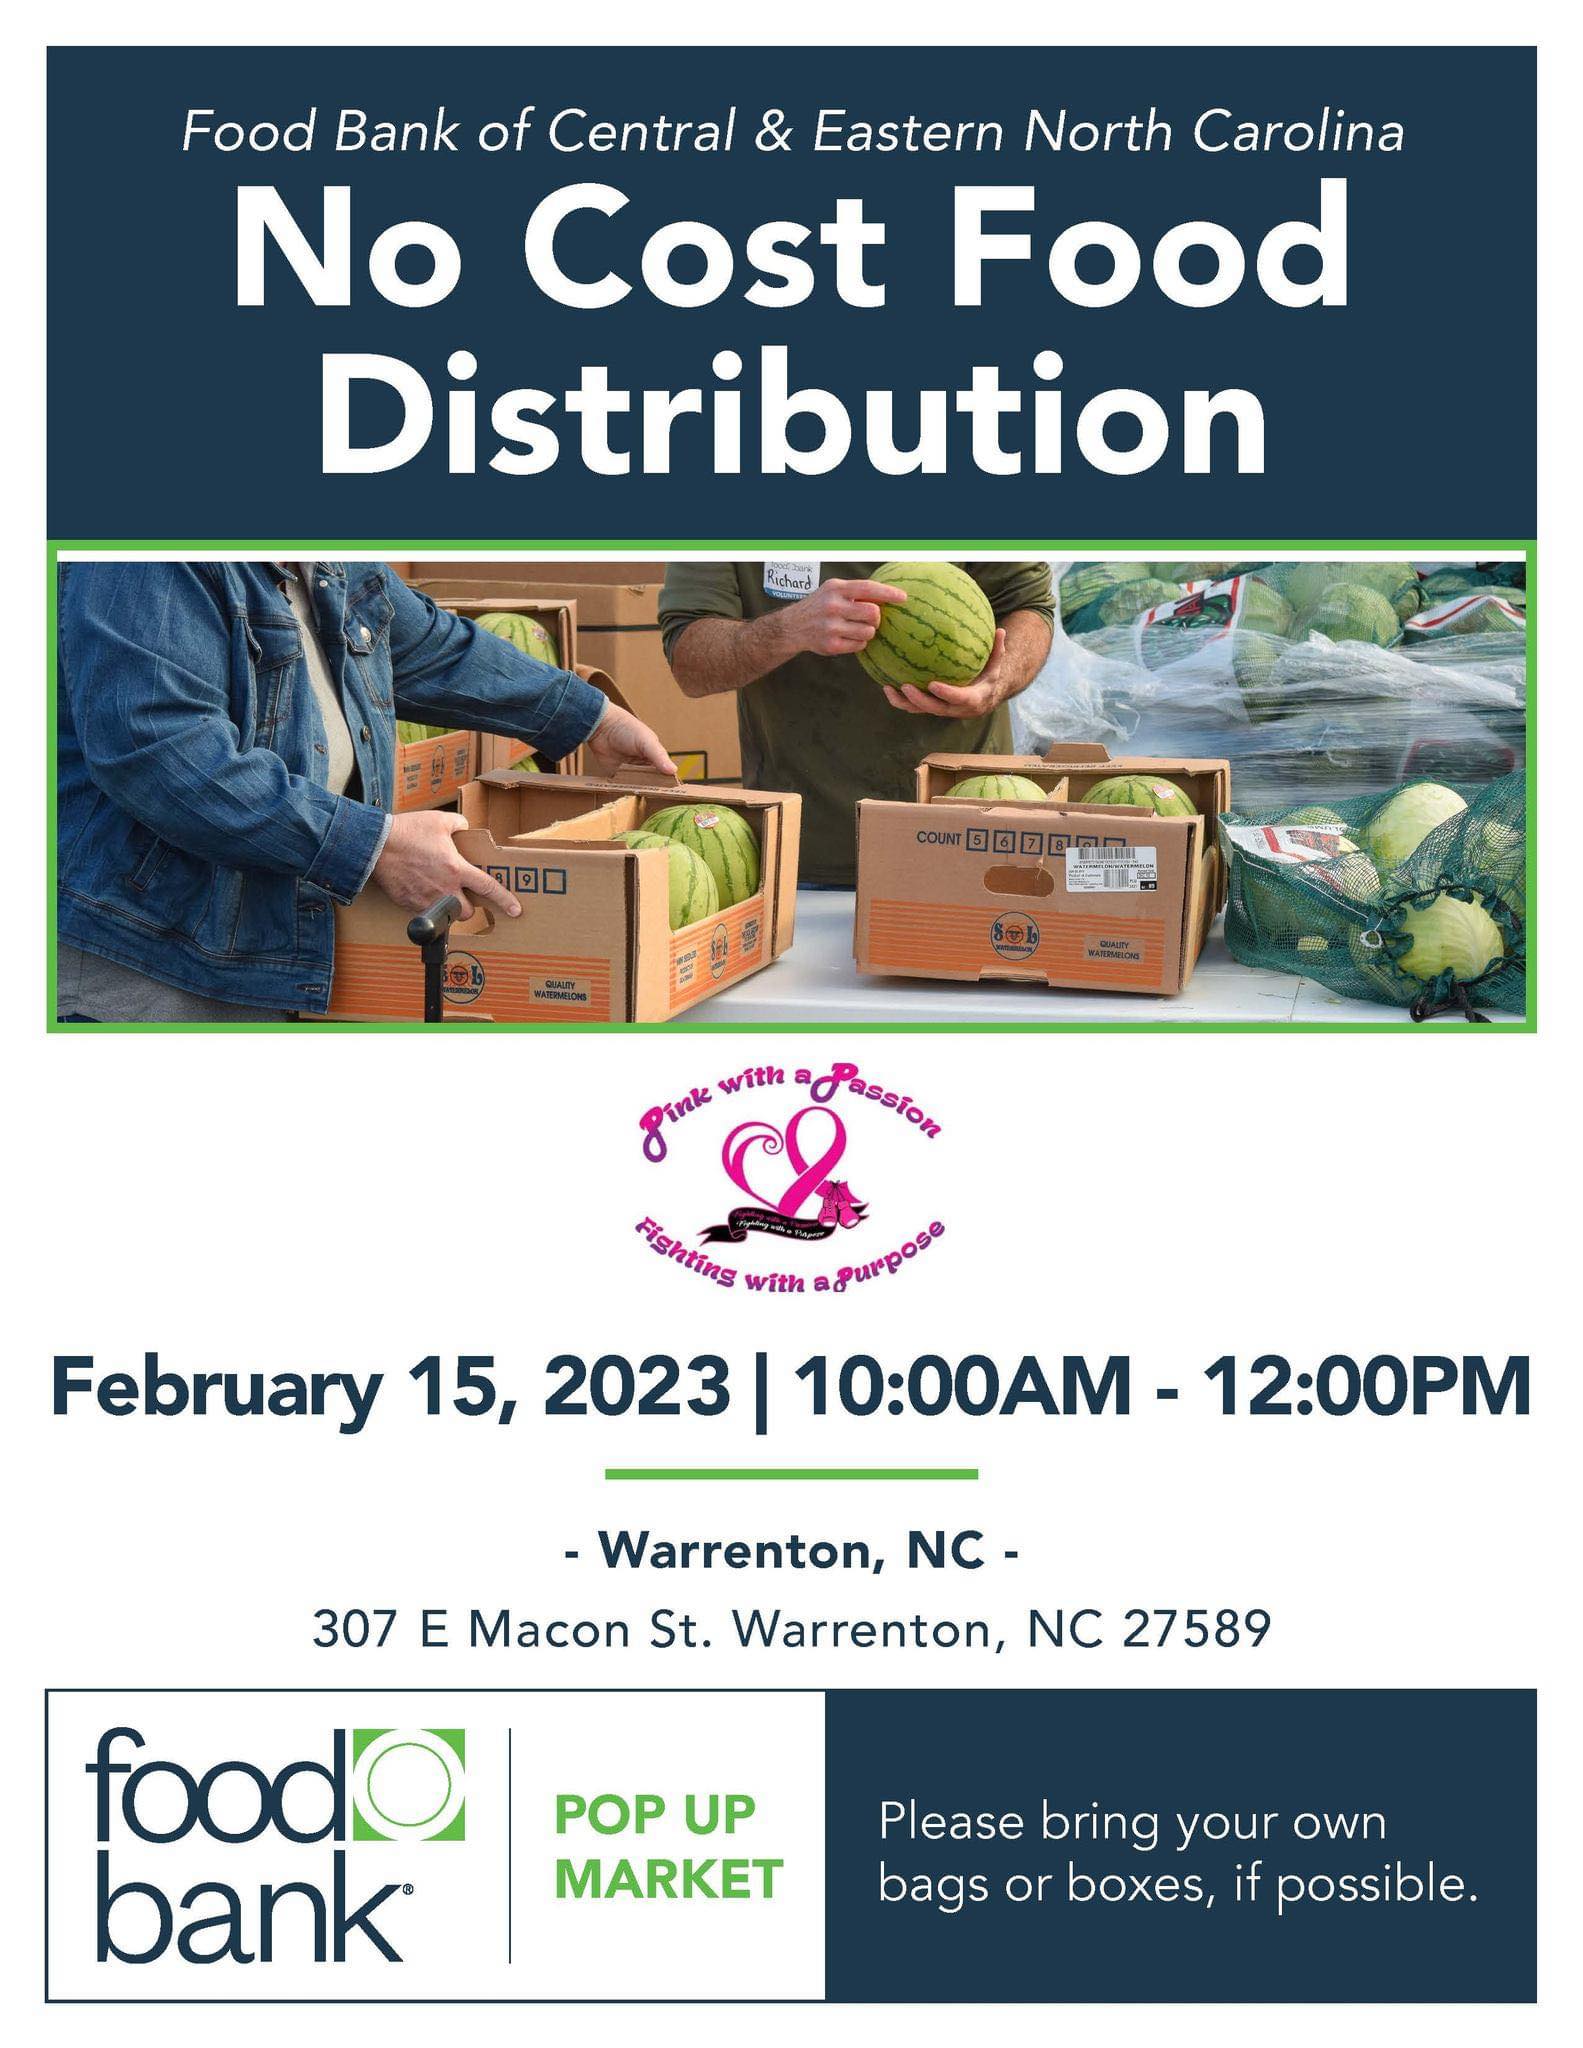 no cost food distribution pink with a passion warrenton nc february 15 2023